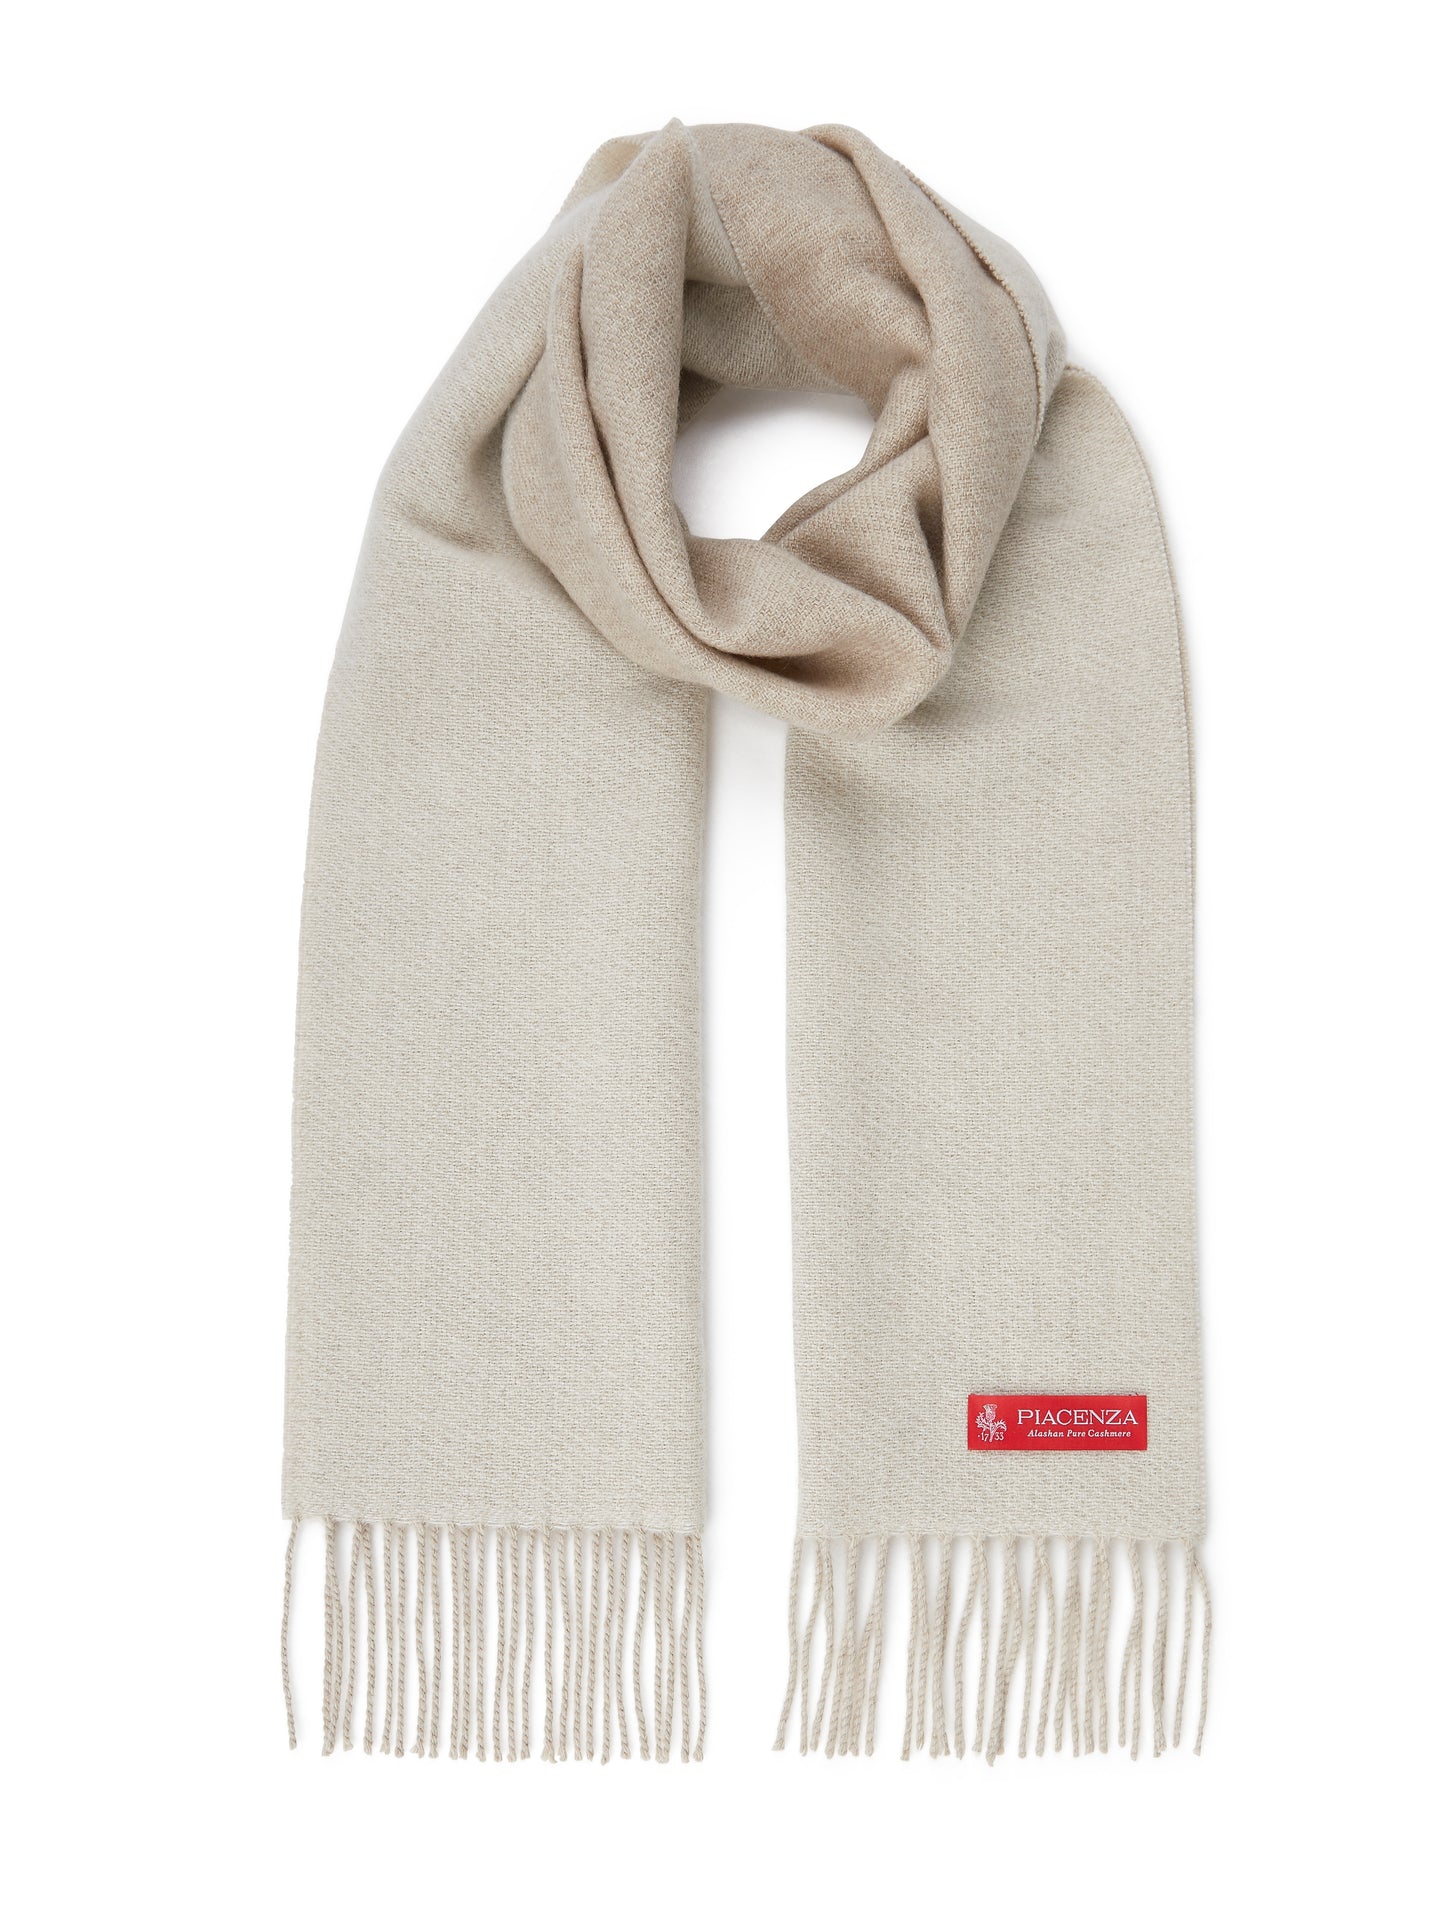 Supreme scarf with two-tone light brown fringes